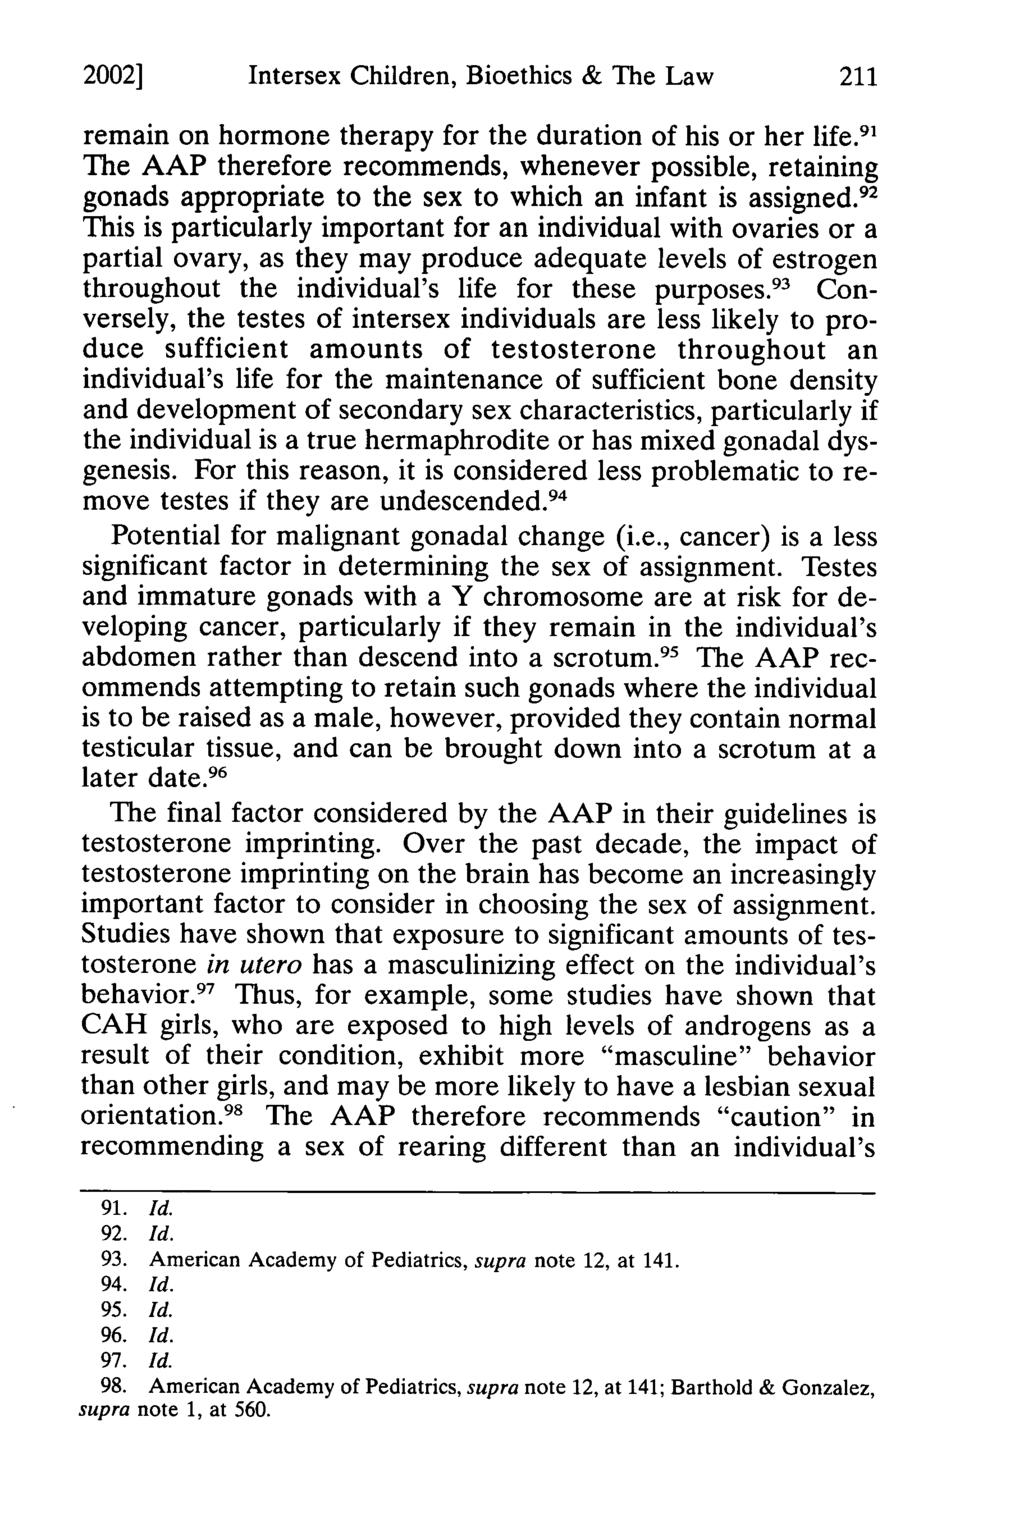 20021 Hermer: Paradigms Revised: Intersex Children, Bioethics & the Law Intersex Children, Bioethics & The Law remain on hormone therapy for the duration of his or her life.